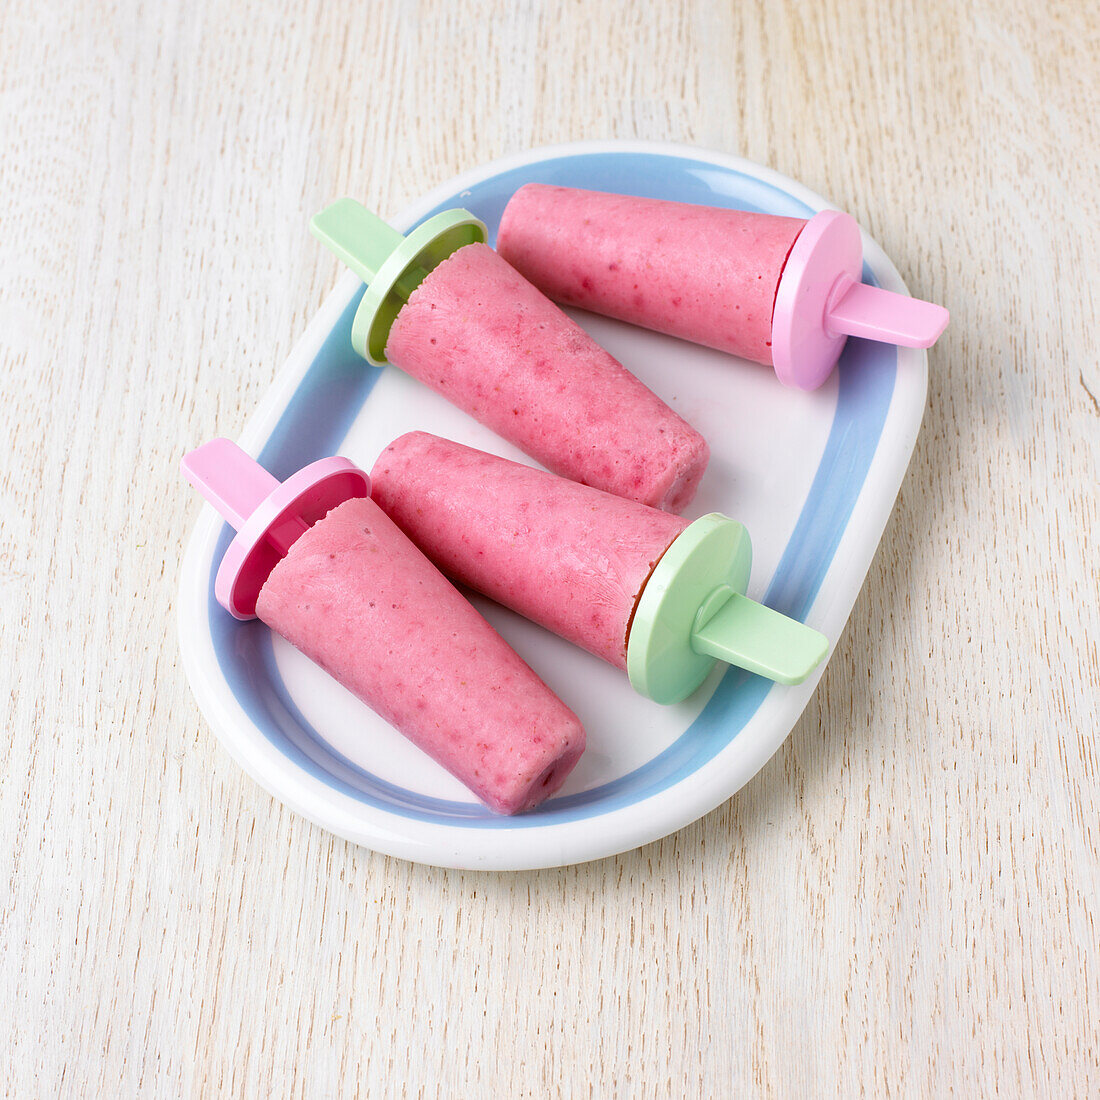 Frozen smoothie popsicles